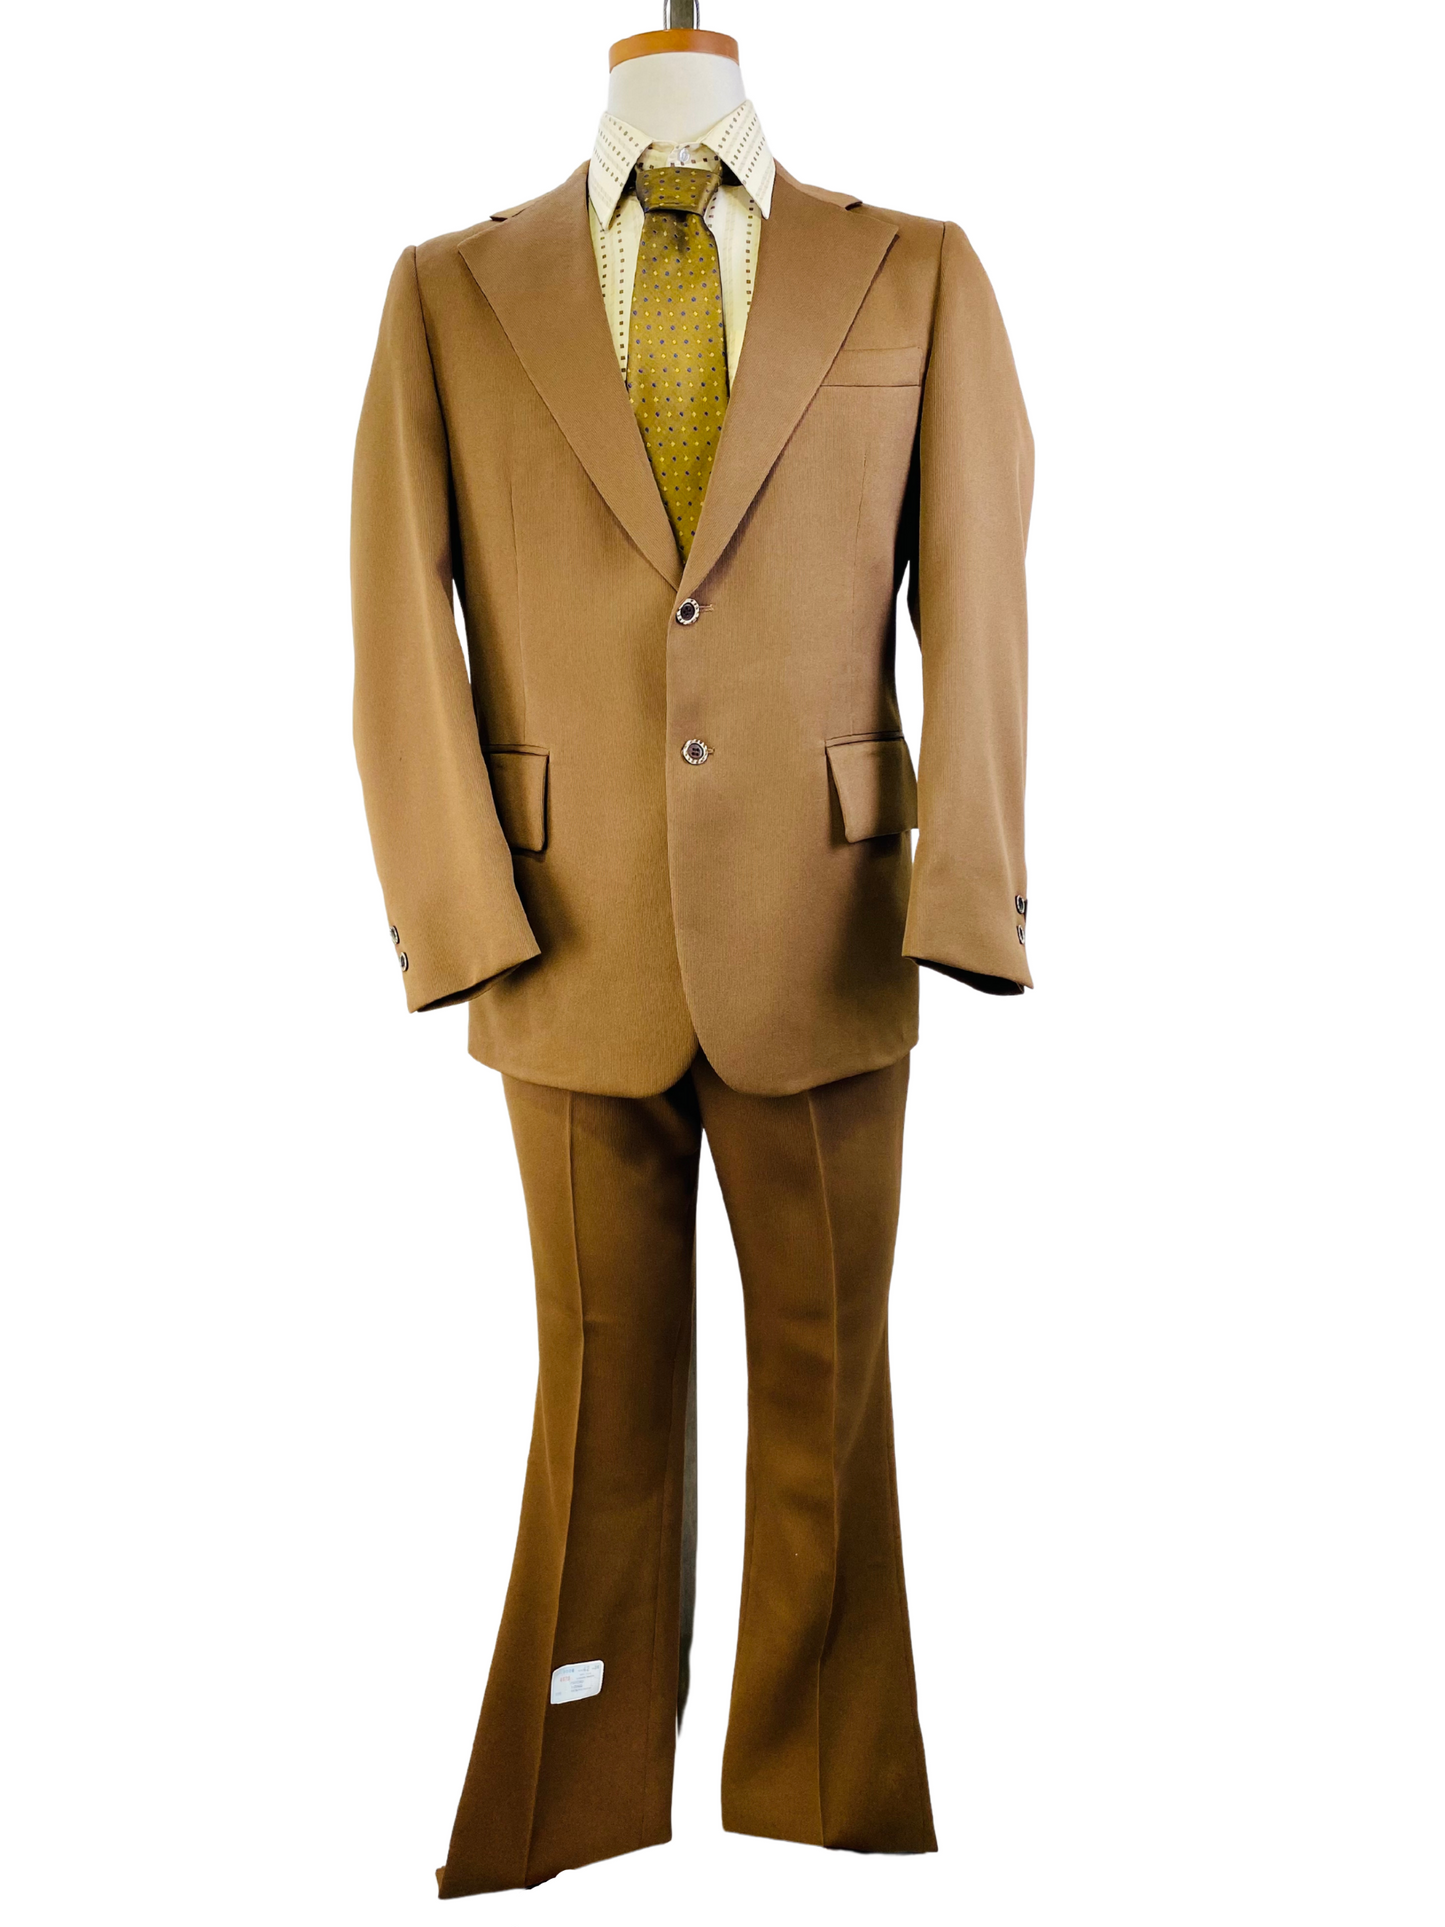 Early 1970s Vintage Deadstock Men's Suit, Brown Solid 2-Piece Poly-Twill Suit, Prestige Clothes, NOS